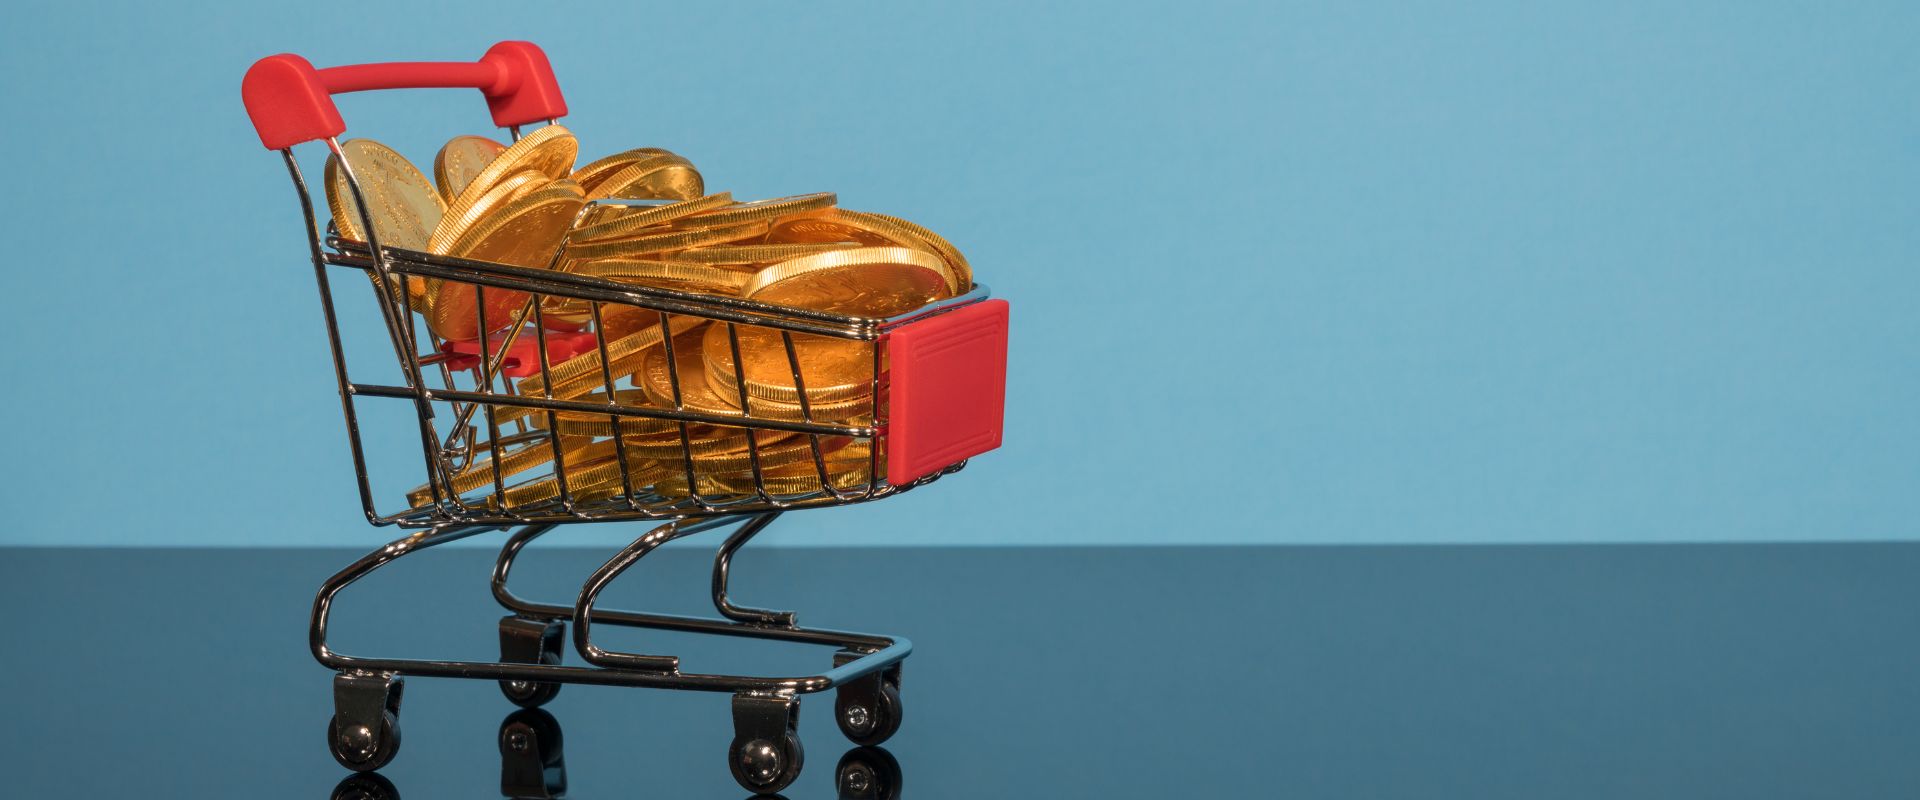 shopping cart full of gold coins